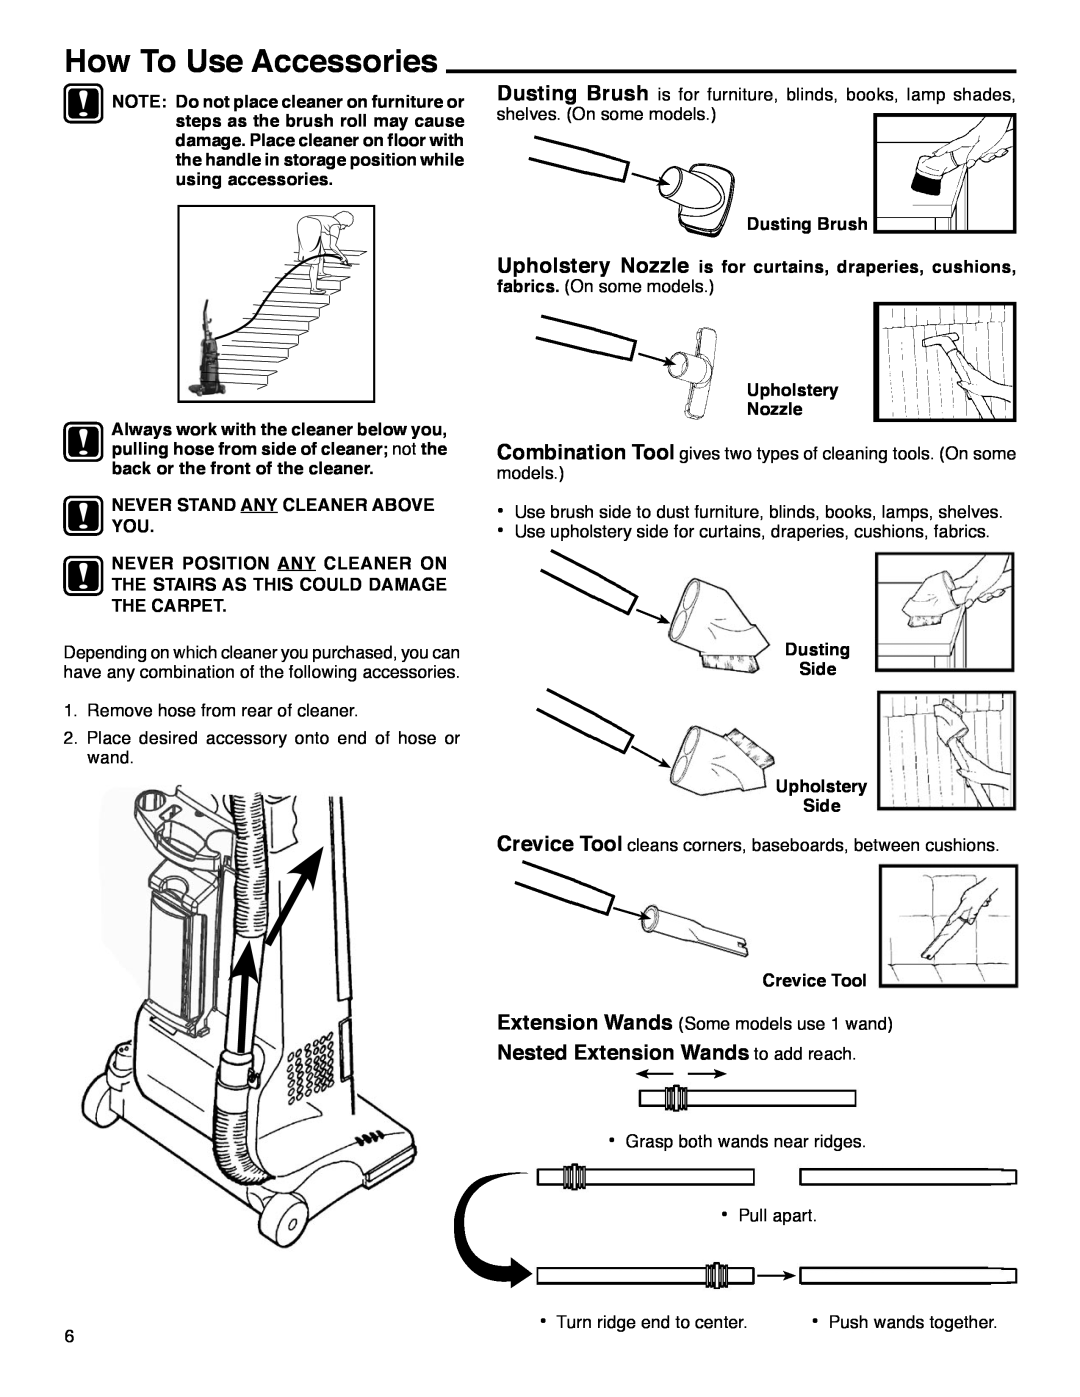 Eureka 4320 -4370, 4440 -4470 How To Use Accessories, Never Stand Any Cleaner Above You, Dusting Brush, Upholstery Nozzle 